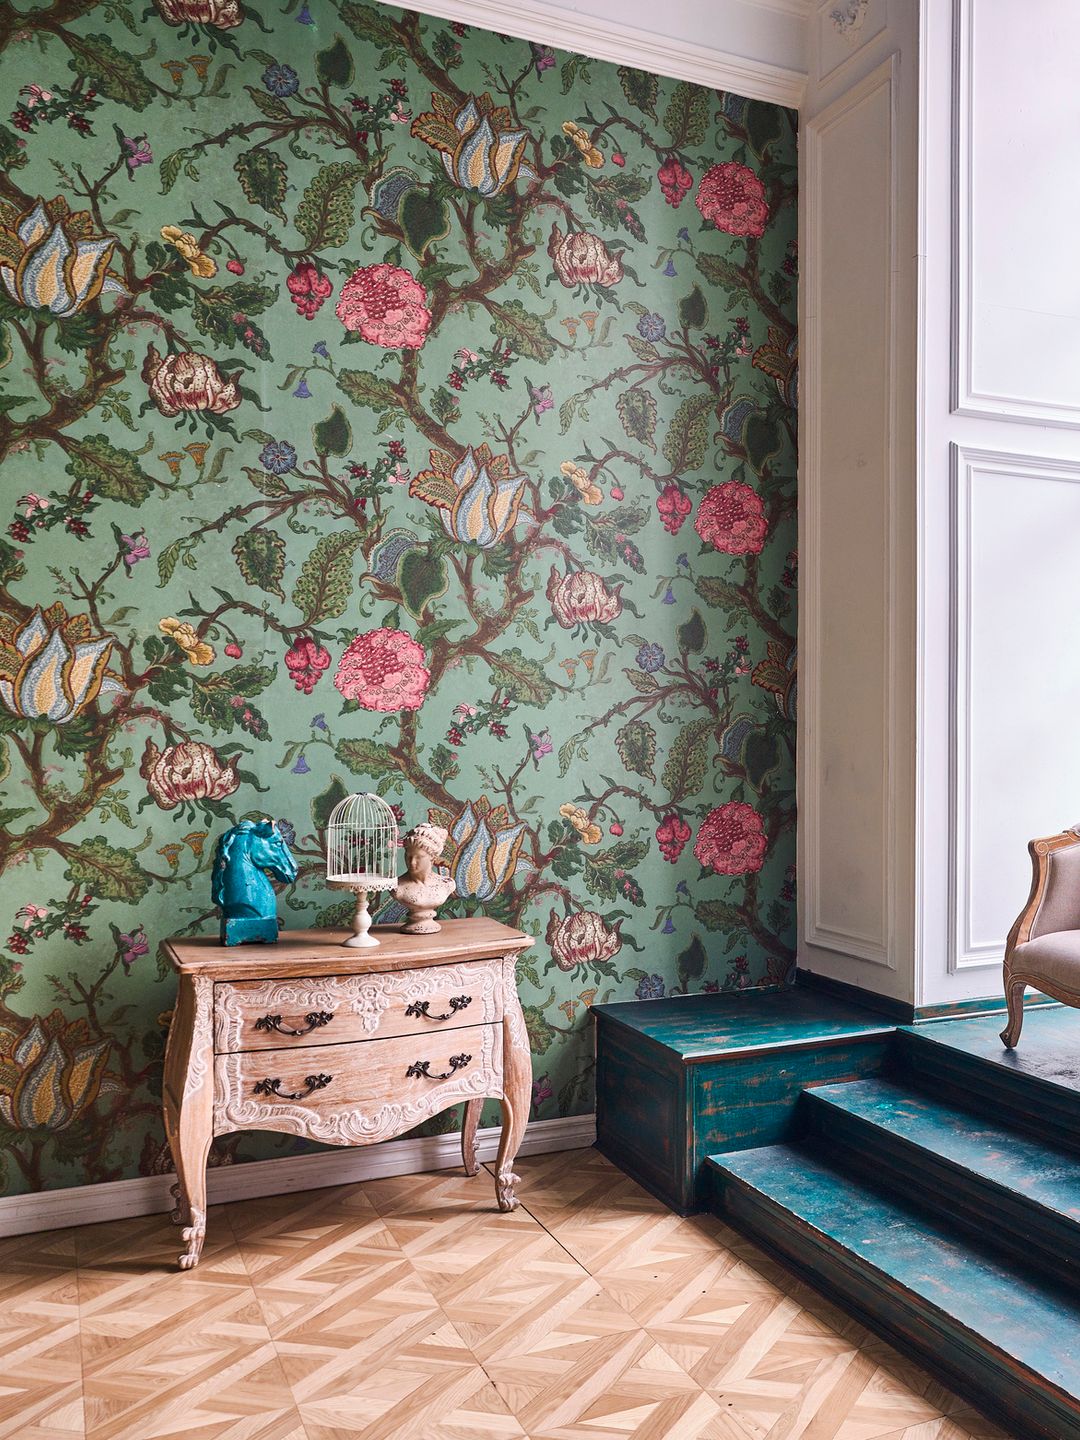 If you're going to brave wallpaper, make sure to buy enough for the entire room henceforth